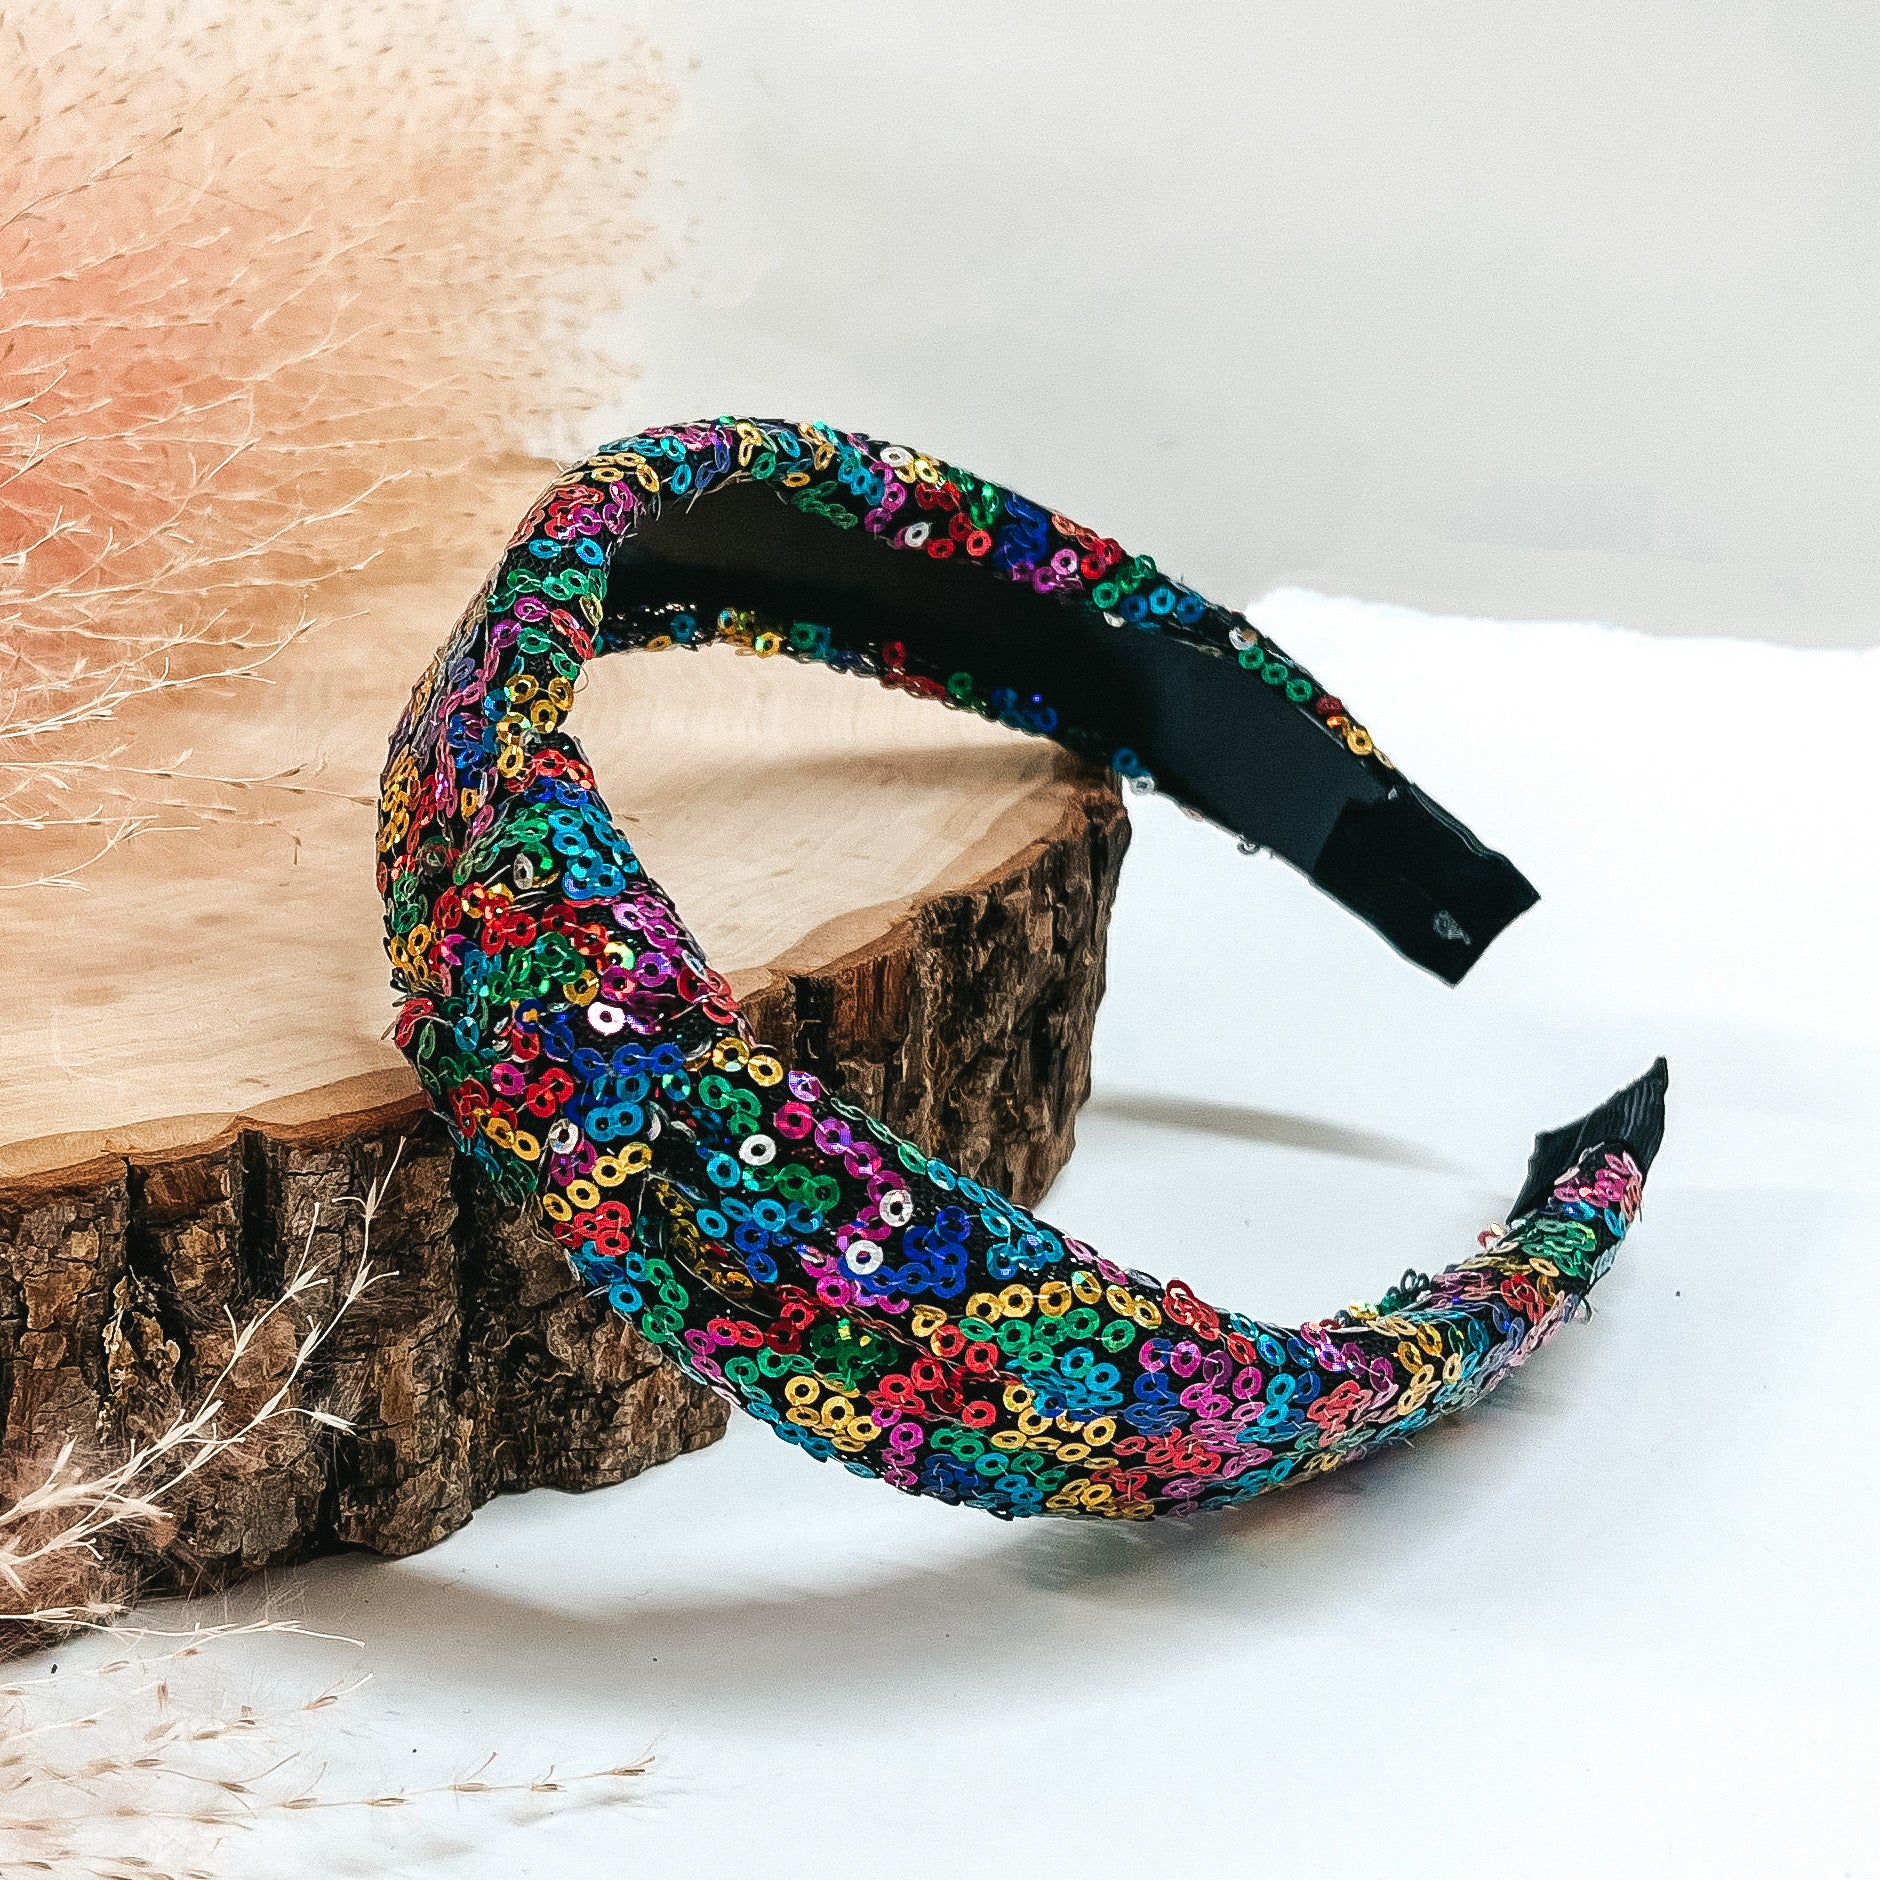 Buy 3 for $10 |  Sequin Headband in Assorted Colors - Giddy Up Glamour Boutique